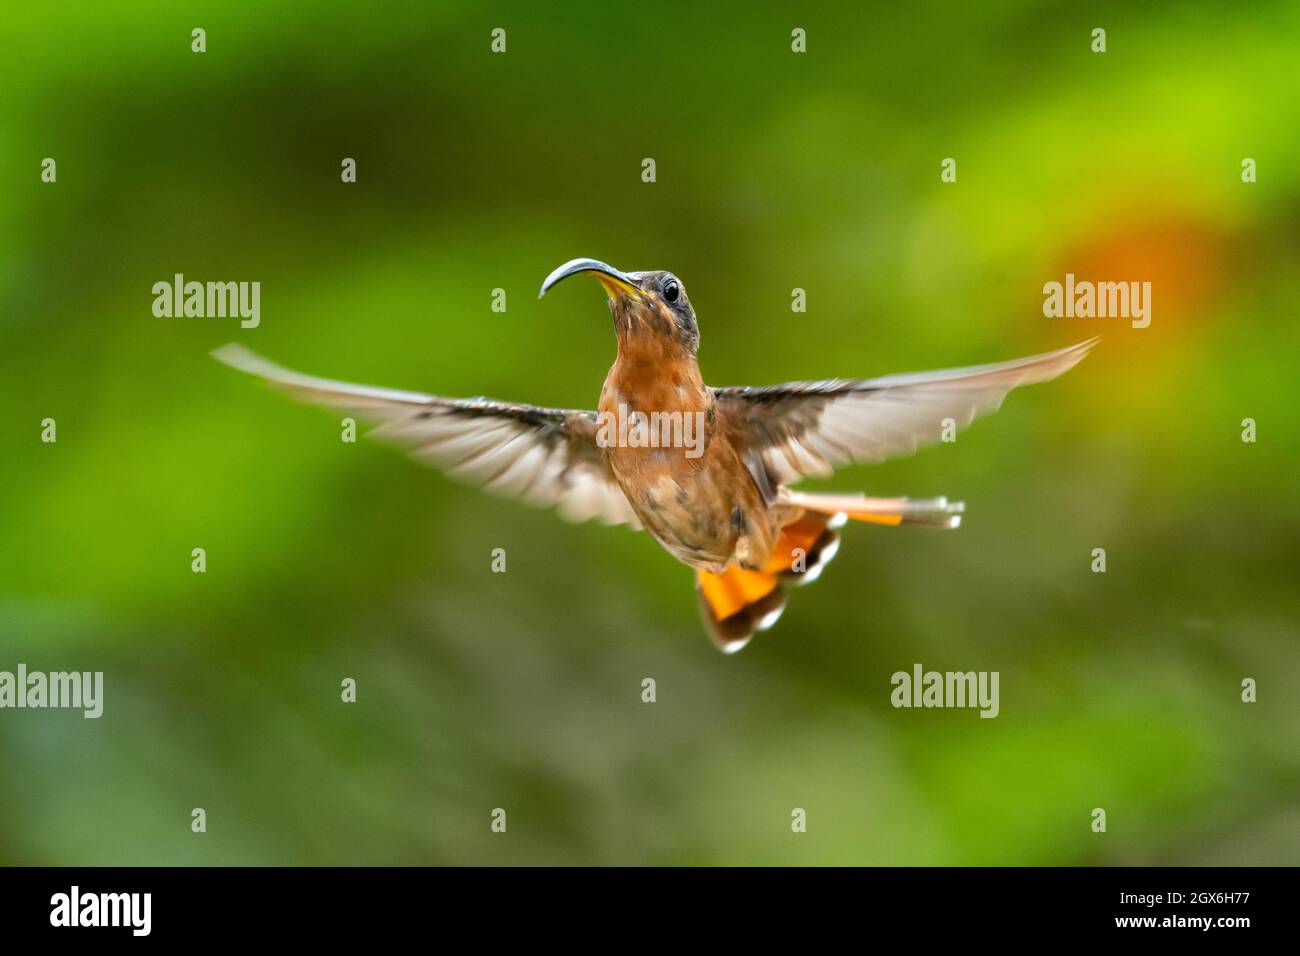 A Rufous-breasted Hermit hummingbird (Glaucis hirsutus) hovering in the air in a unique acrobatic position with a bokeh backgorund. Stock Photo